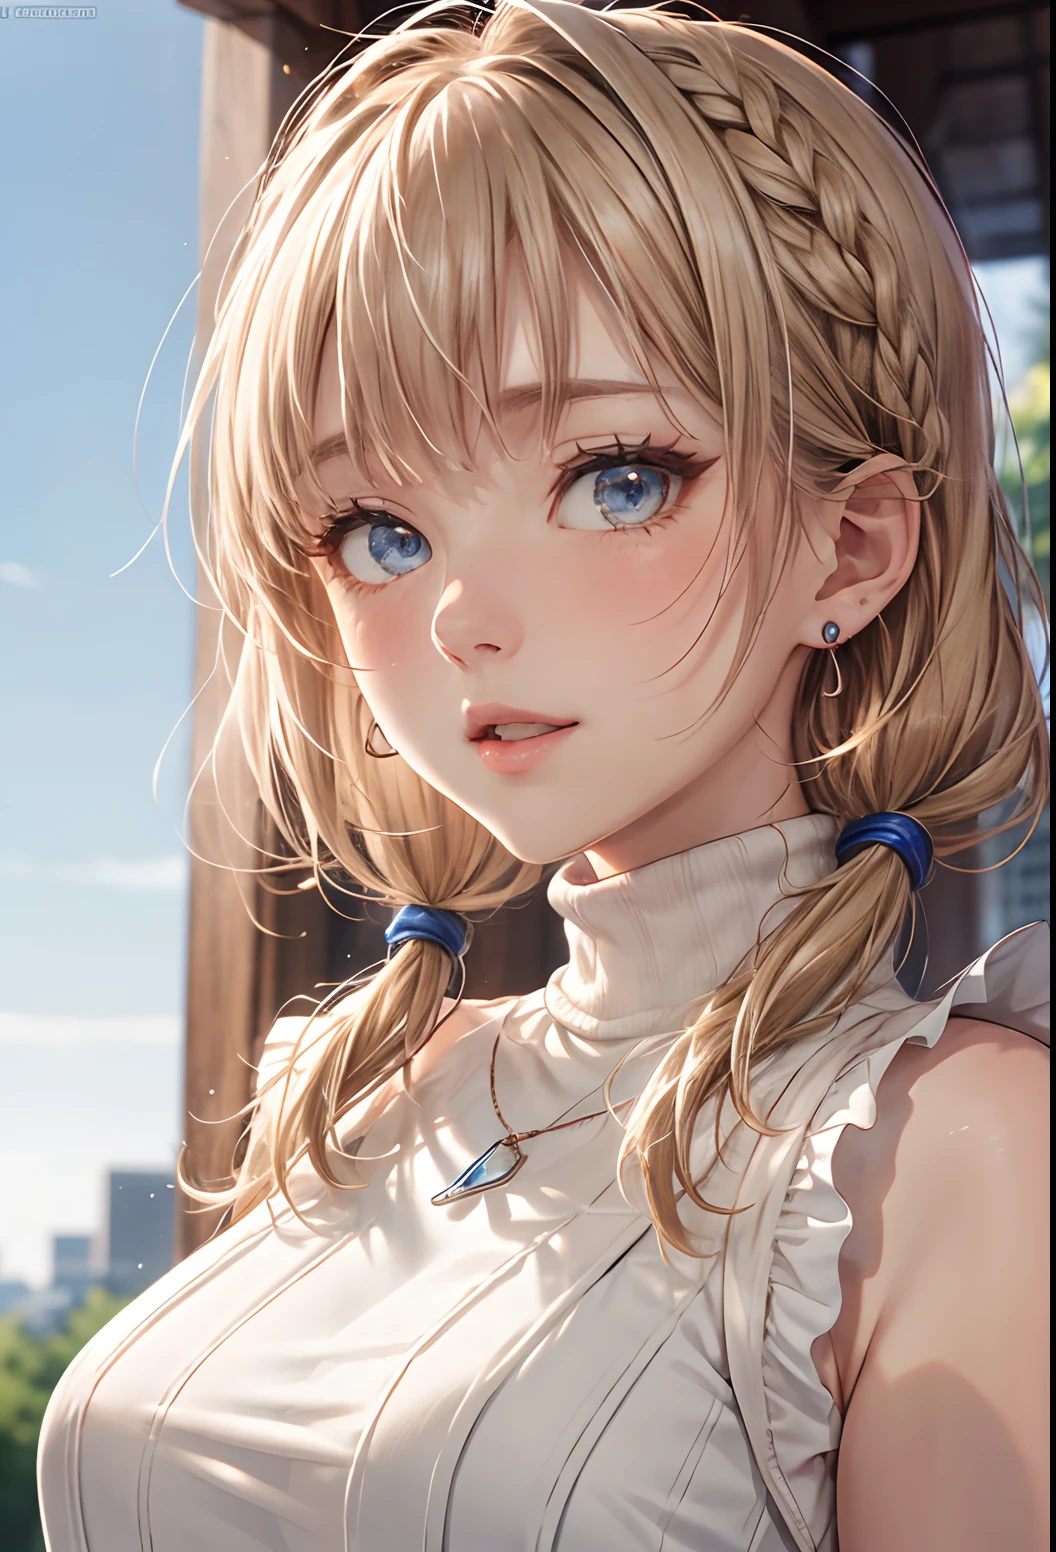 absurderes, ultra-detailliert,bright colour, extremely beautiful detailed anime face and eyes, view straight on, ;D, shiny_skin,25 years old, Short hair, , asymmetrical bangs, Blonde hair with short twin tails, Shiny hair, Delicate beautiful face, red blush、Blue eyes, White skin, hair clips, earrings, a necklace,(Brown Turtleneck Sleeveless:1.2), Beautiful cloud, Dusk sky,